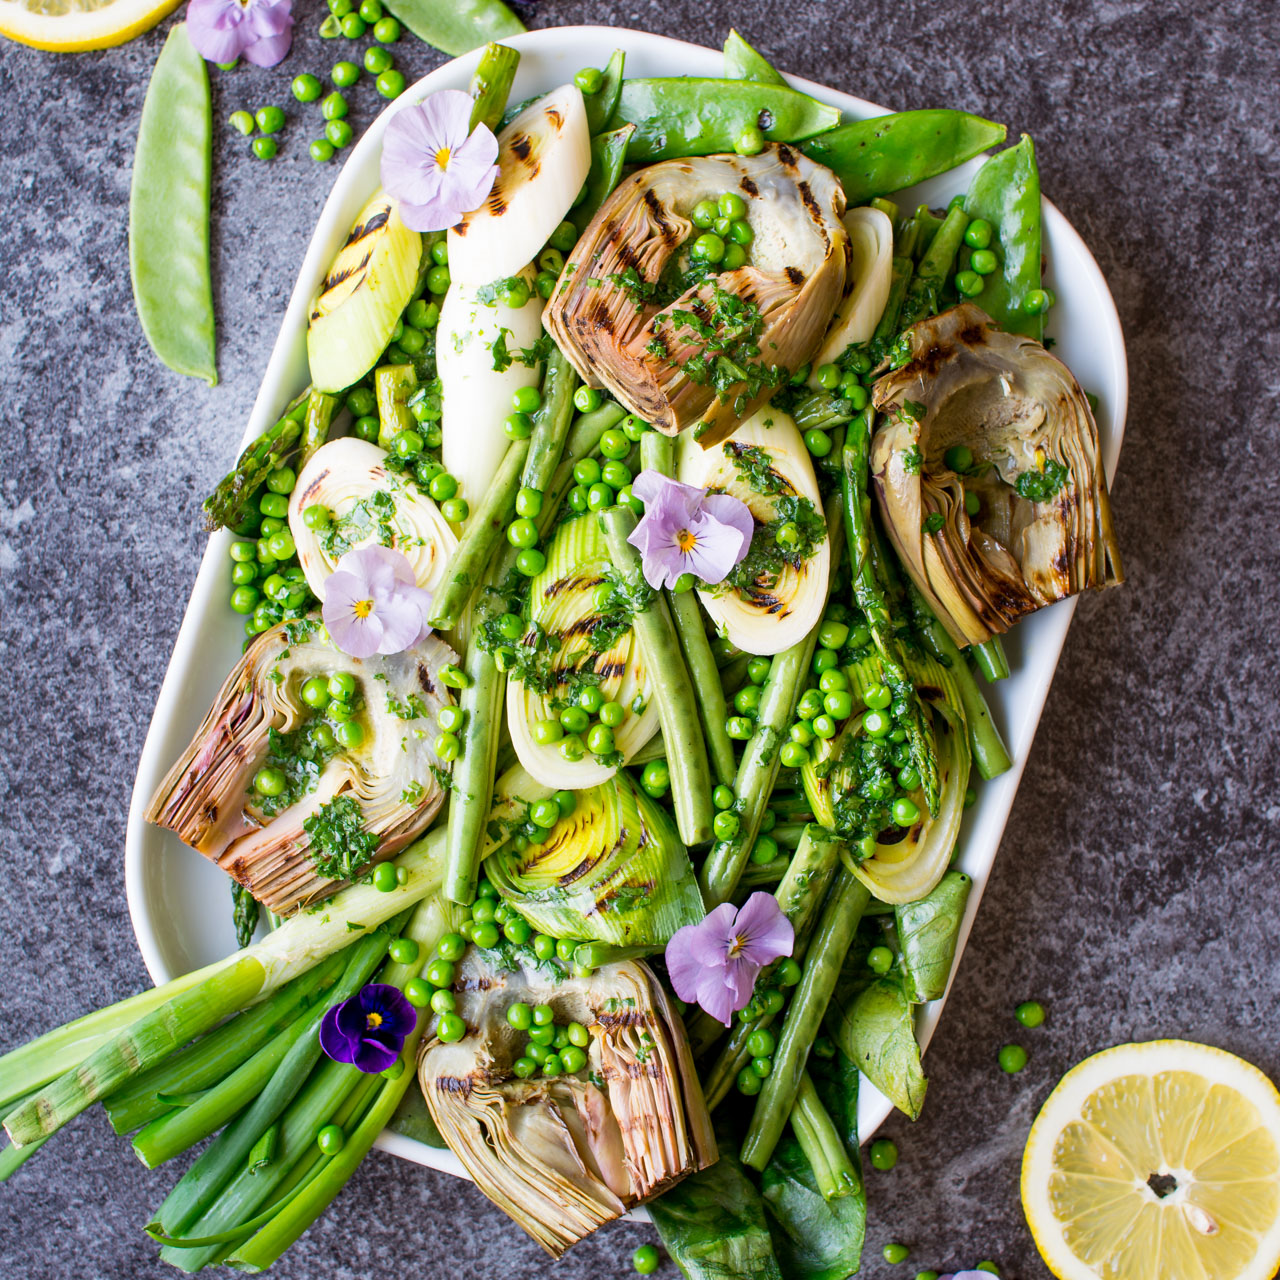 Grilled Spring Greens with Homemade Lemon Parsley Butter